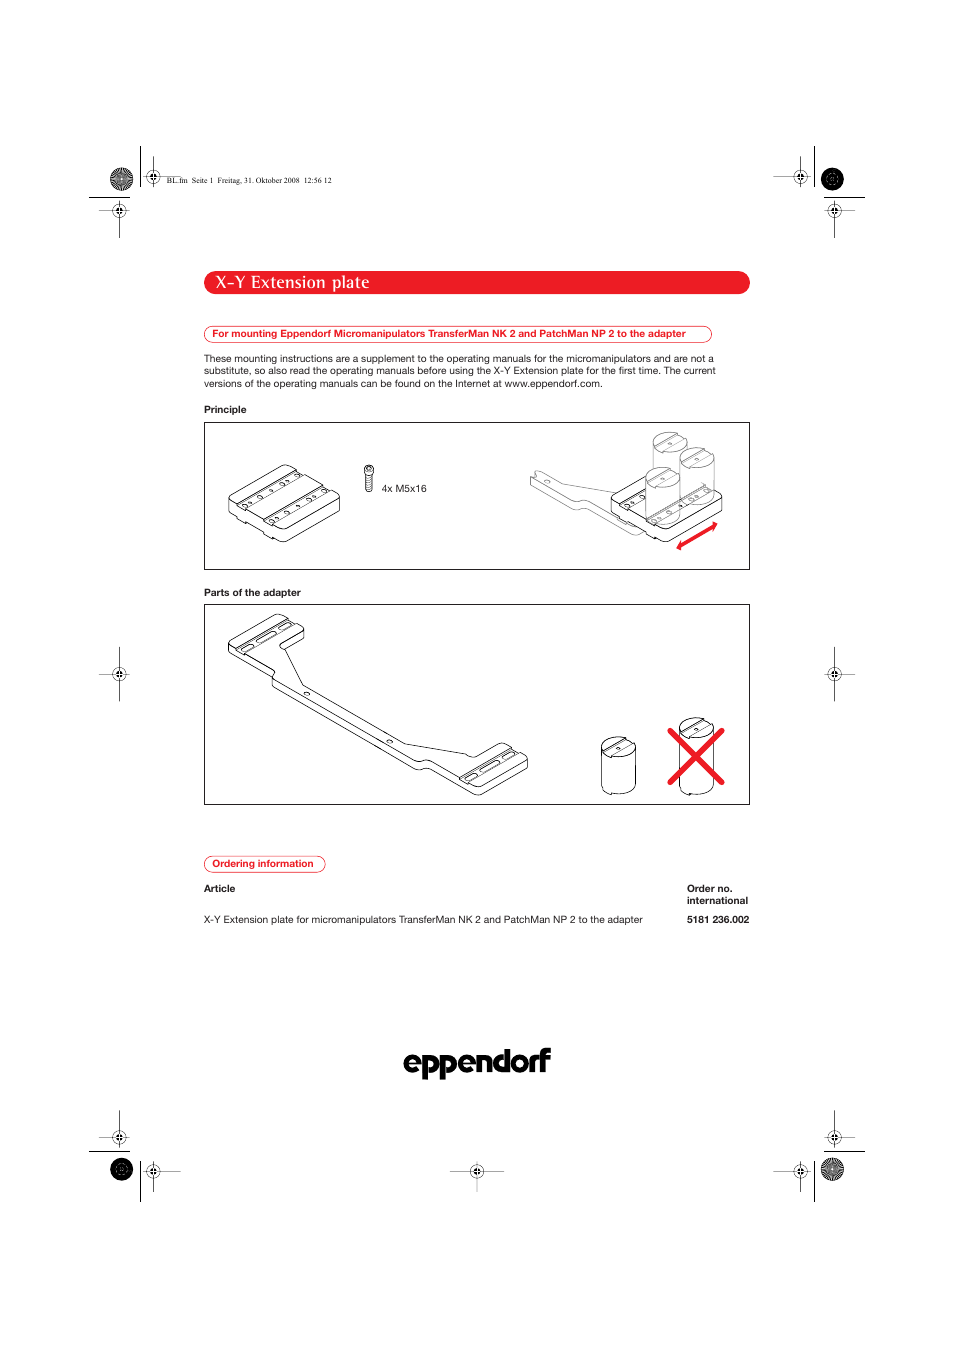 Eppendorf X-Y Extension Plate User Manual | 2 pages